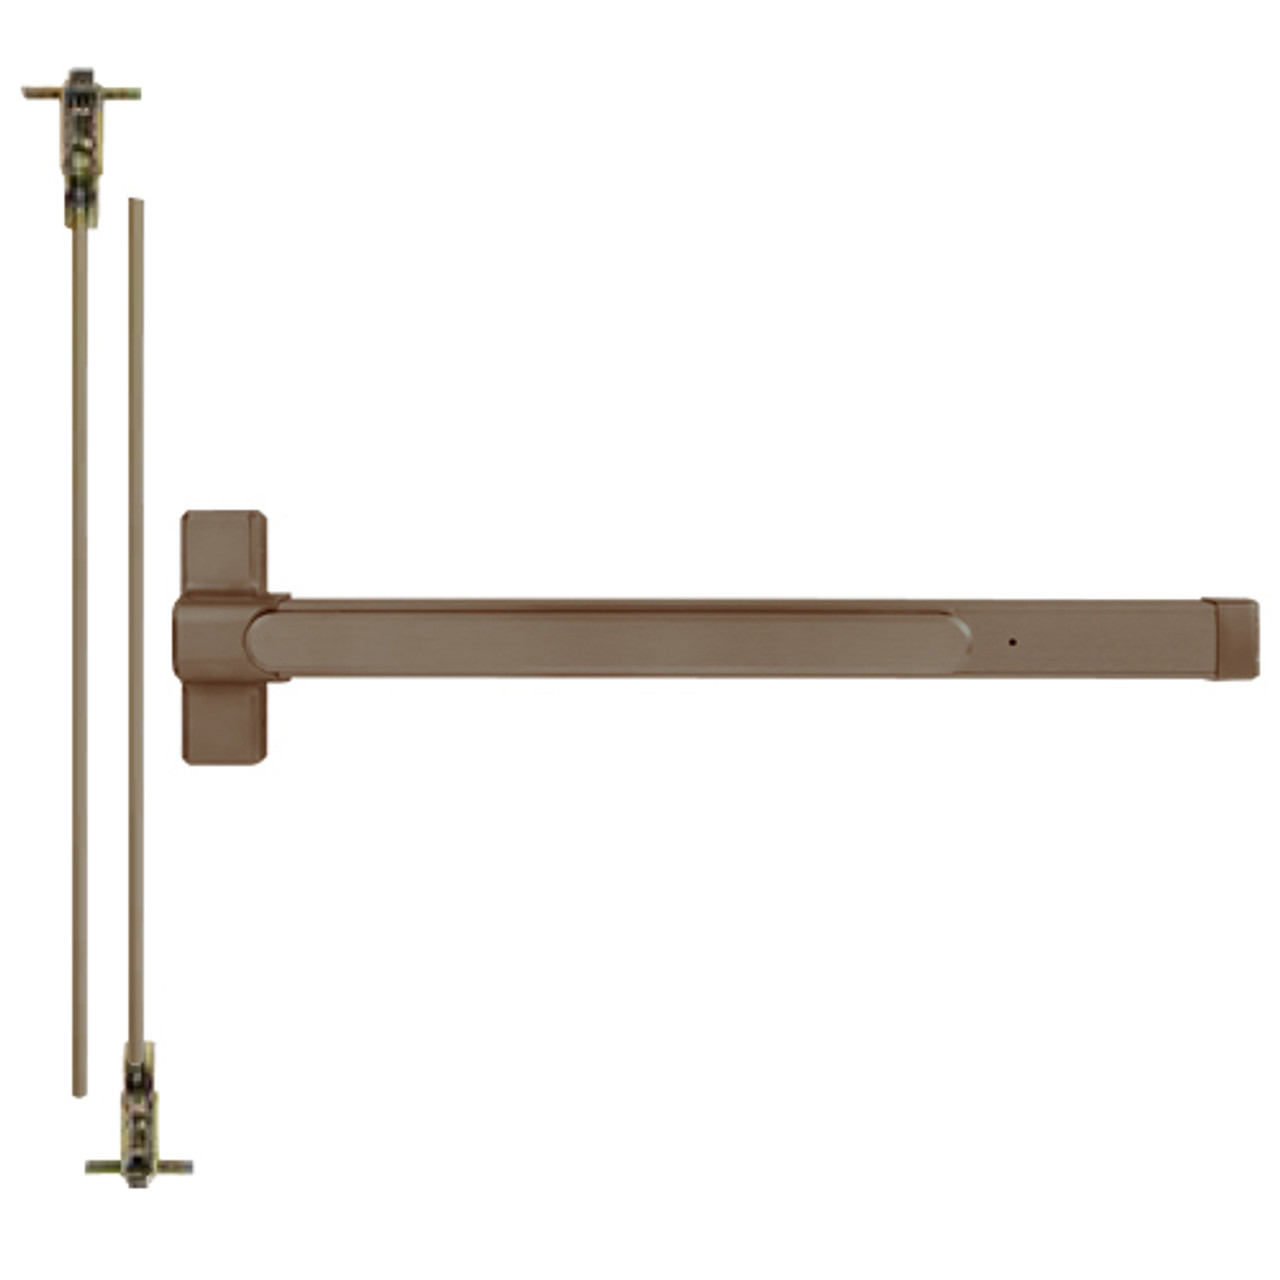 QED126X-48-7-313AN Stanley QED100 Series Heavy Duty Concealed Vertical Rod Fire Rated Exit Device in Anodized Duranodic Bronze Finish